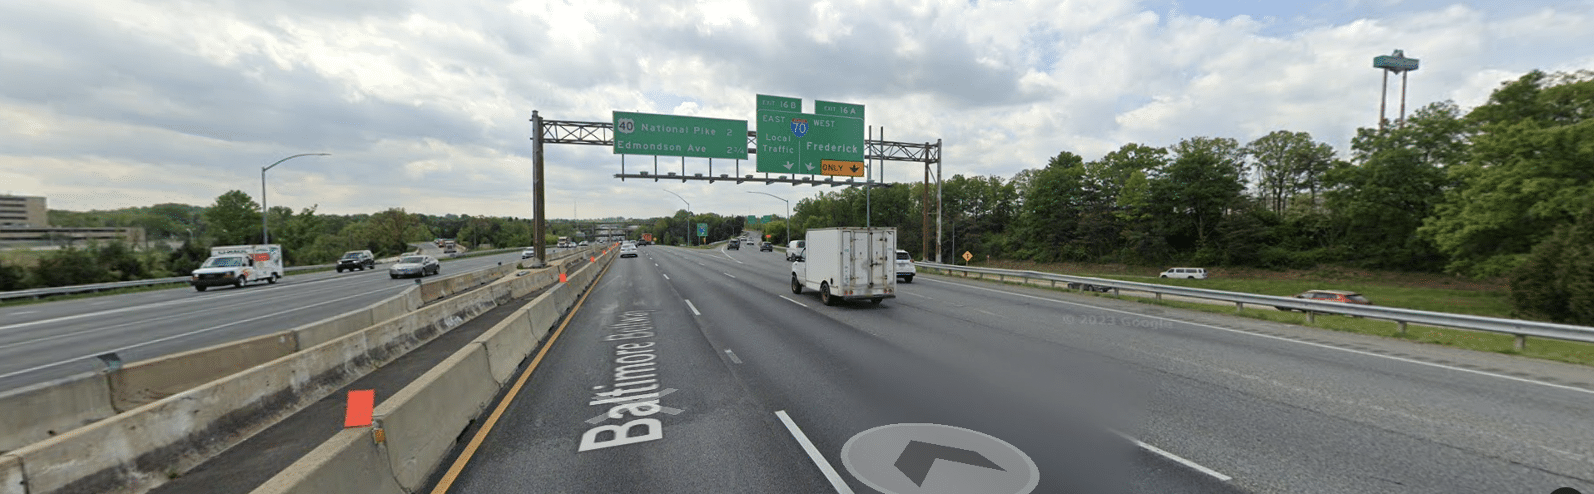 March’s Baltimore Beltway Crash Deemed “Closer to the Rule Than the Exception”